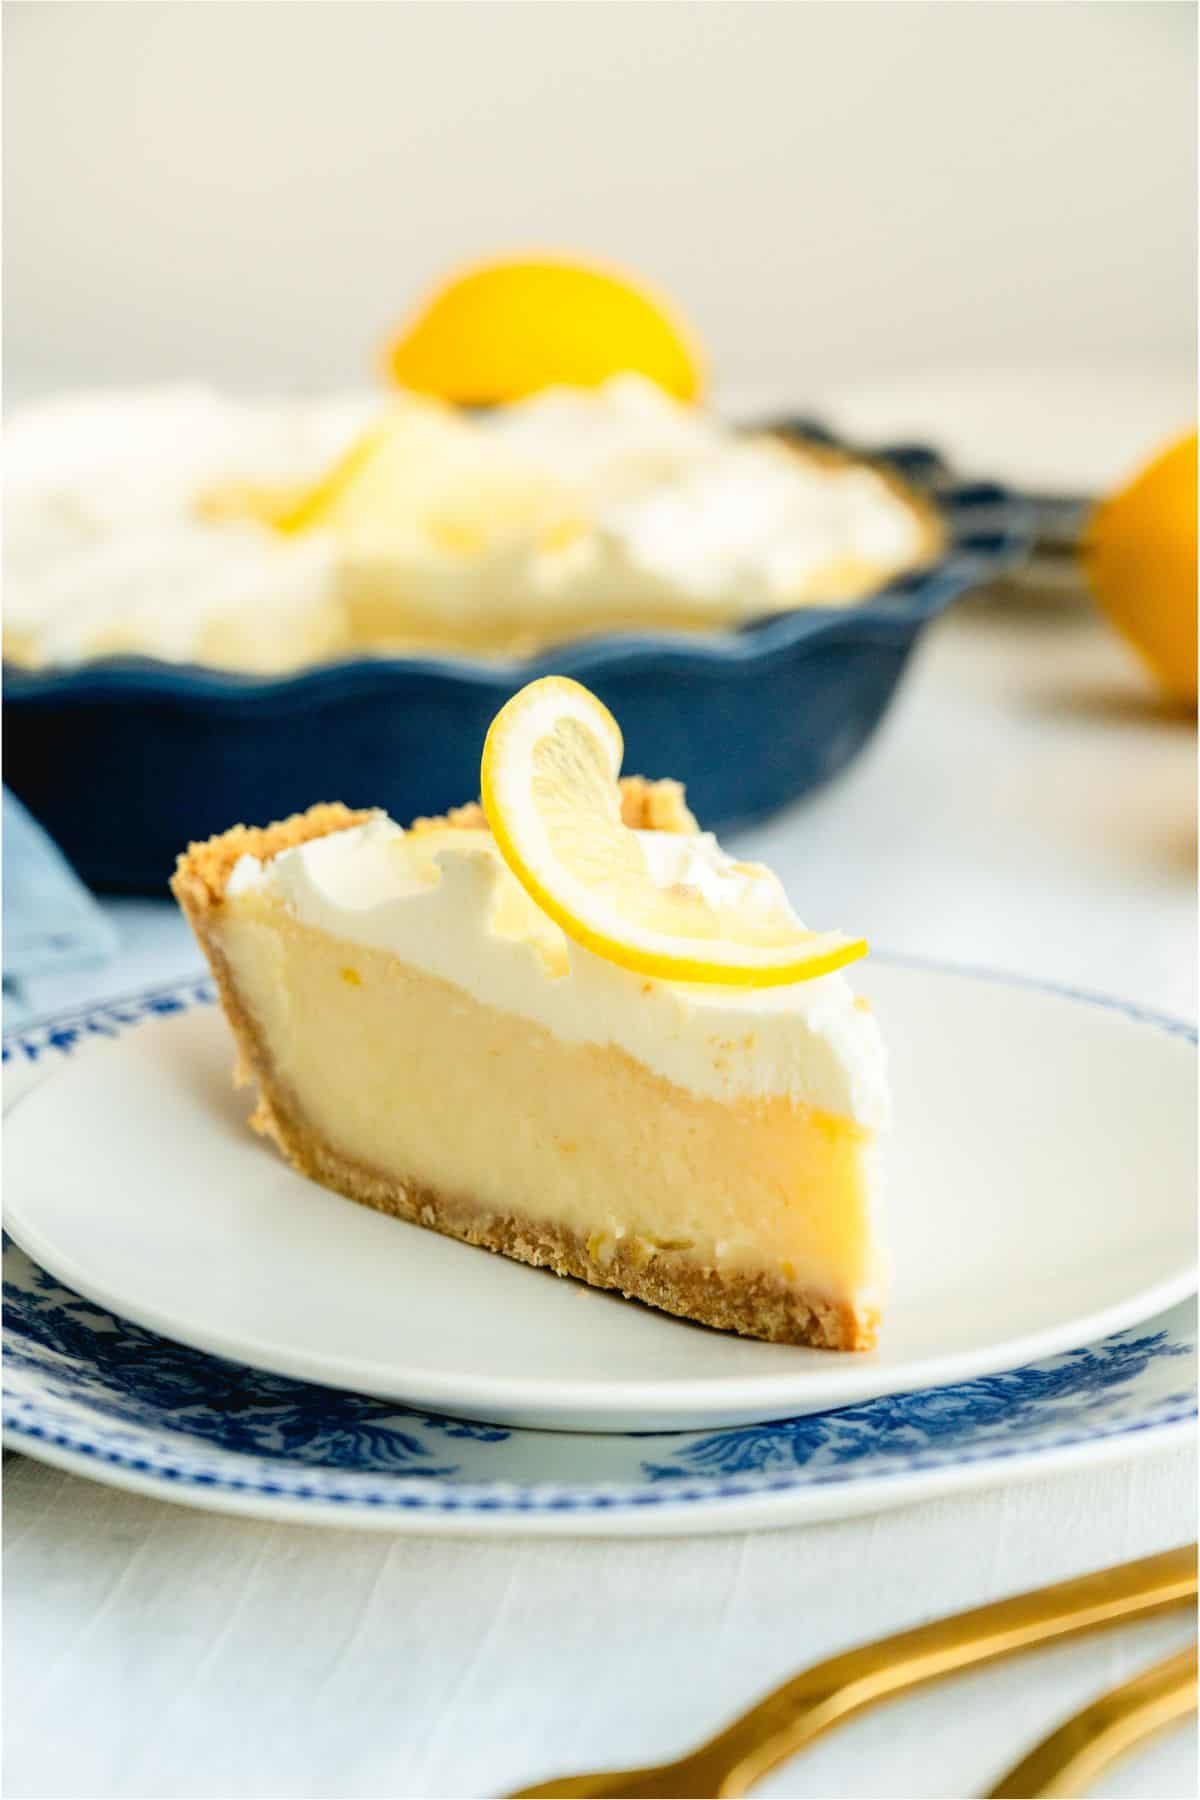 A slice of Creamy Lemon Pie on a plate with the remaining Creamy Lemon Pie in the background